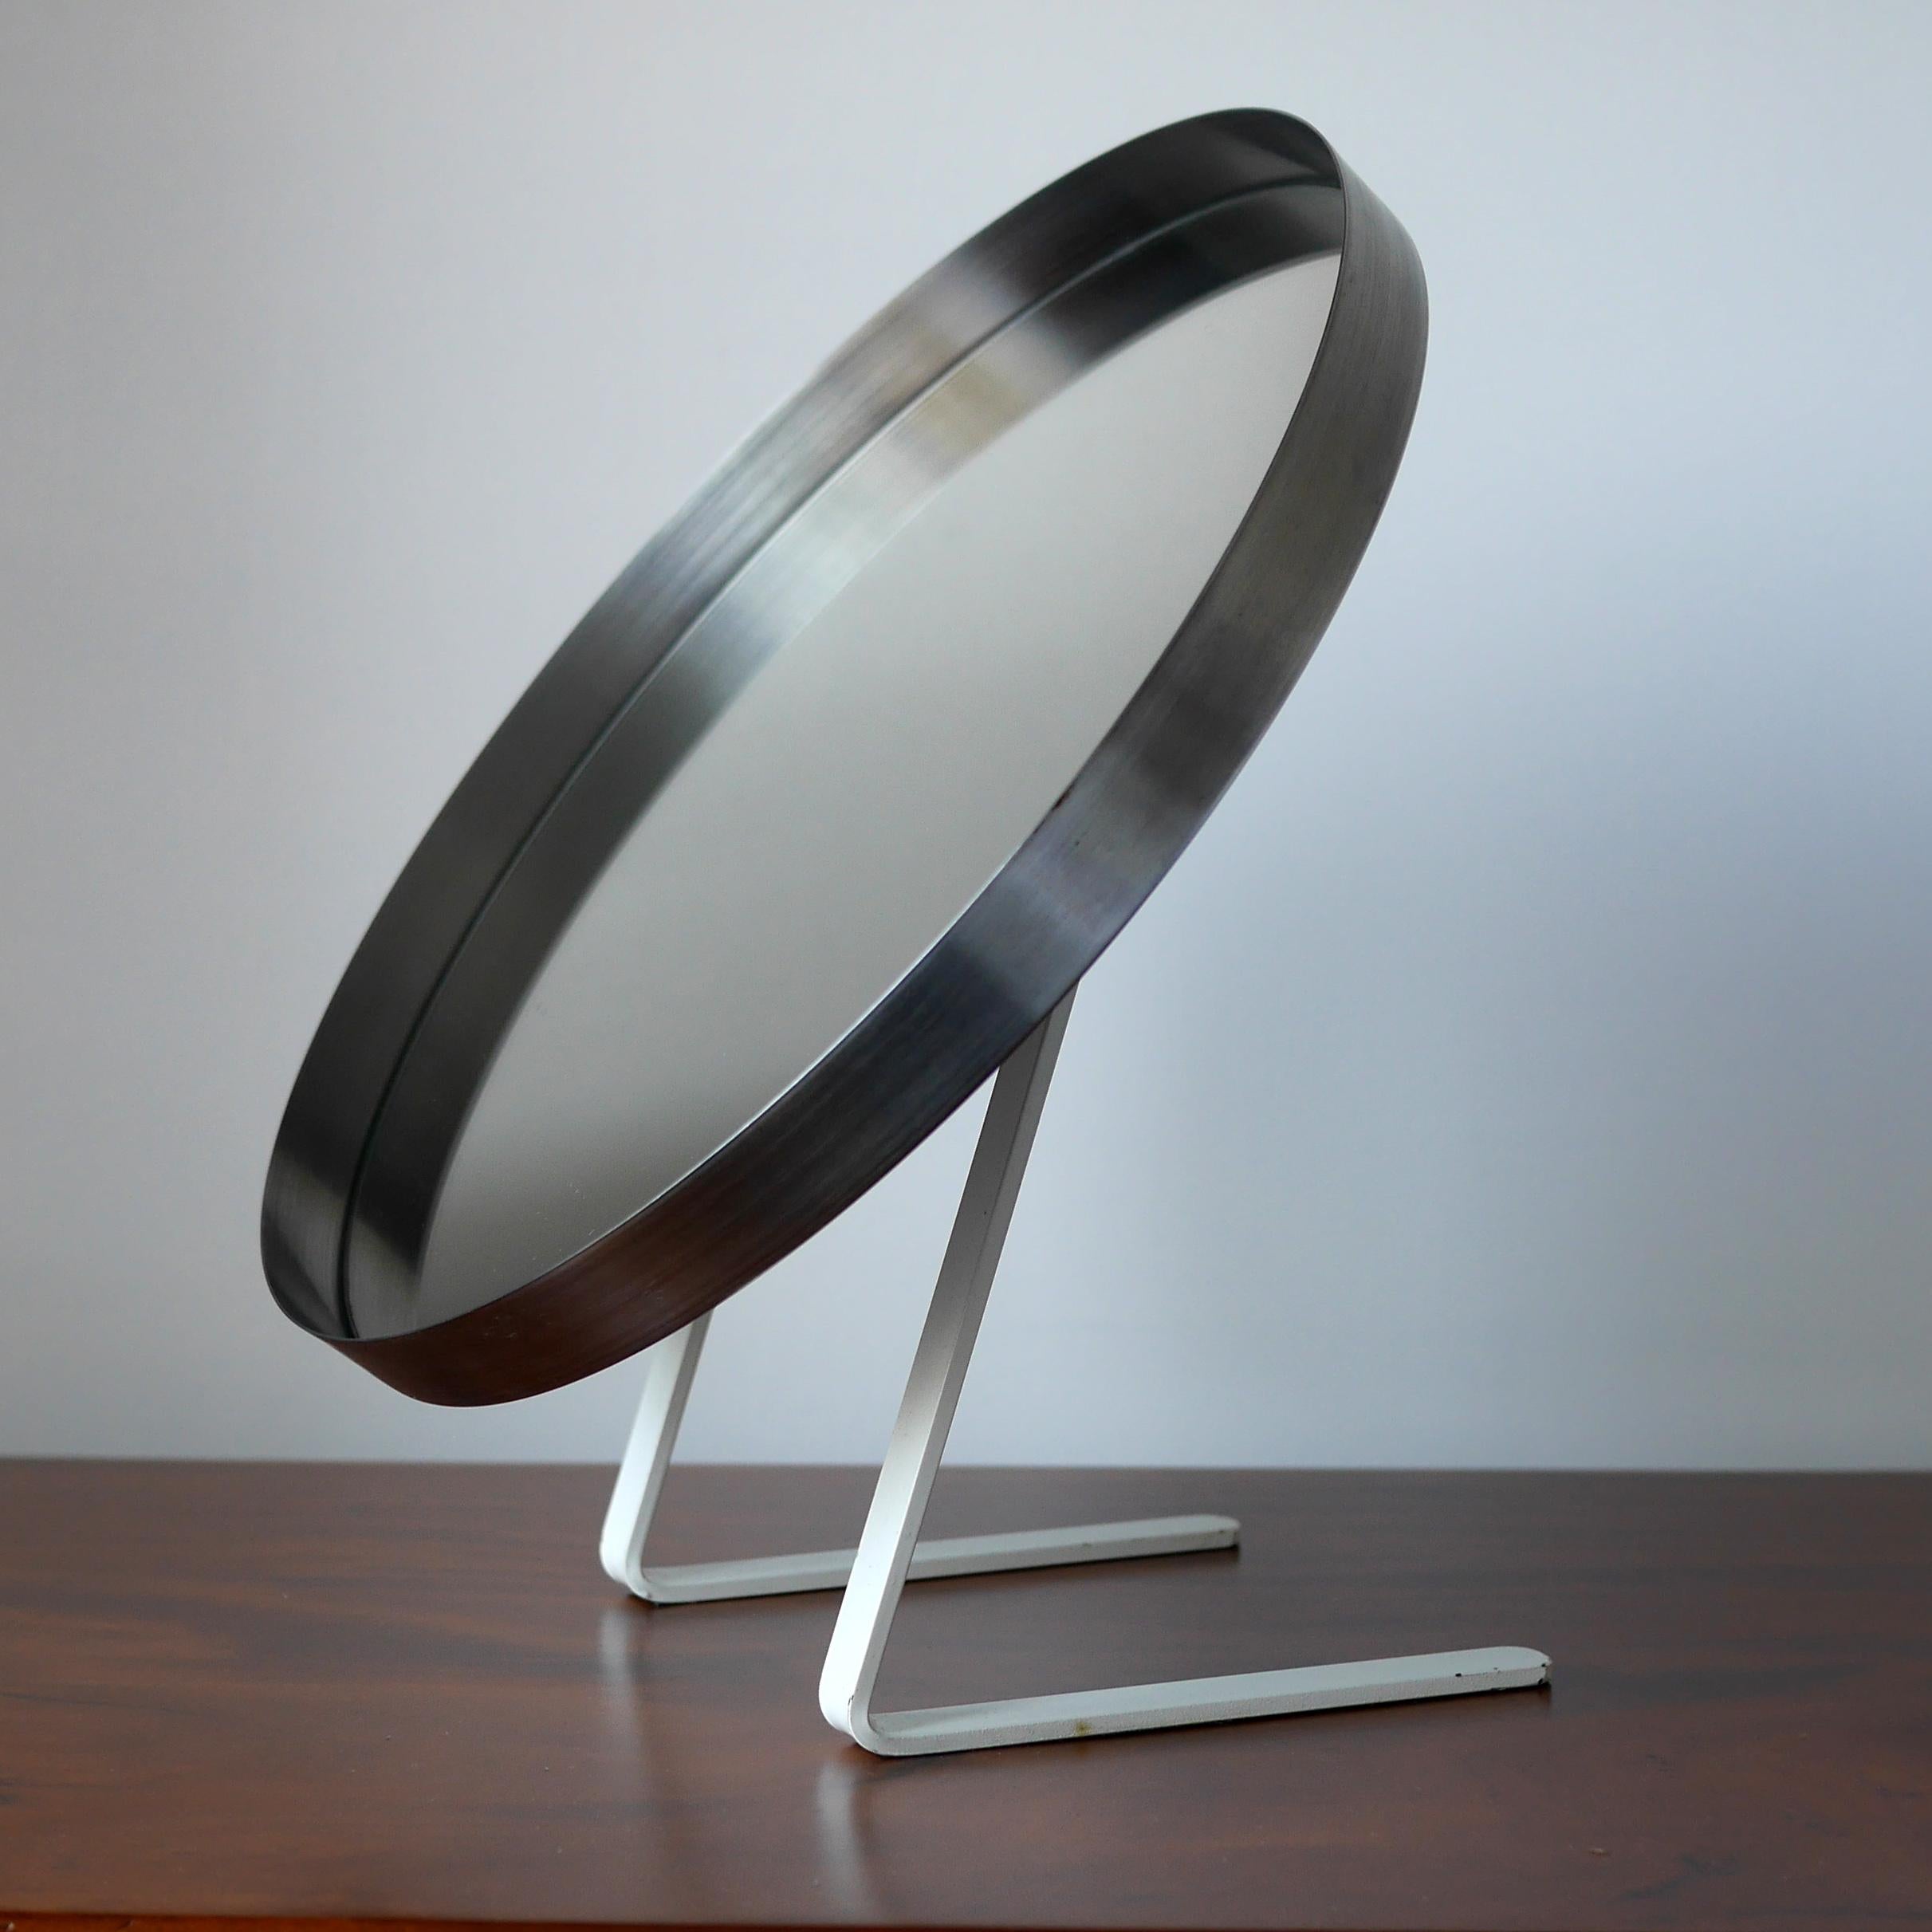 A rare vanity mirror by Owen F. Thomas for Durlston design Ltd circa 1968 in lovely original condition. Crafted from stainless steel with a lovely combination of steel mirror frame and original white enamel finish to the frame. The circular framed